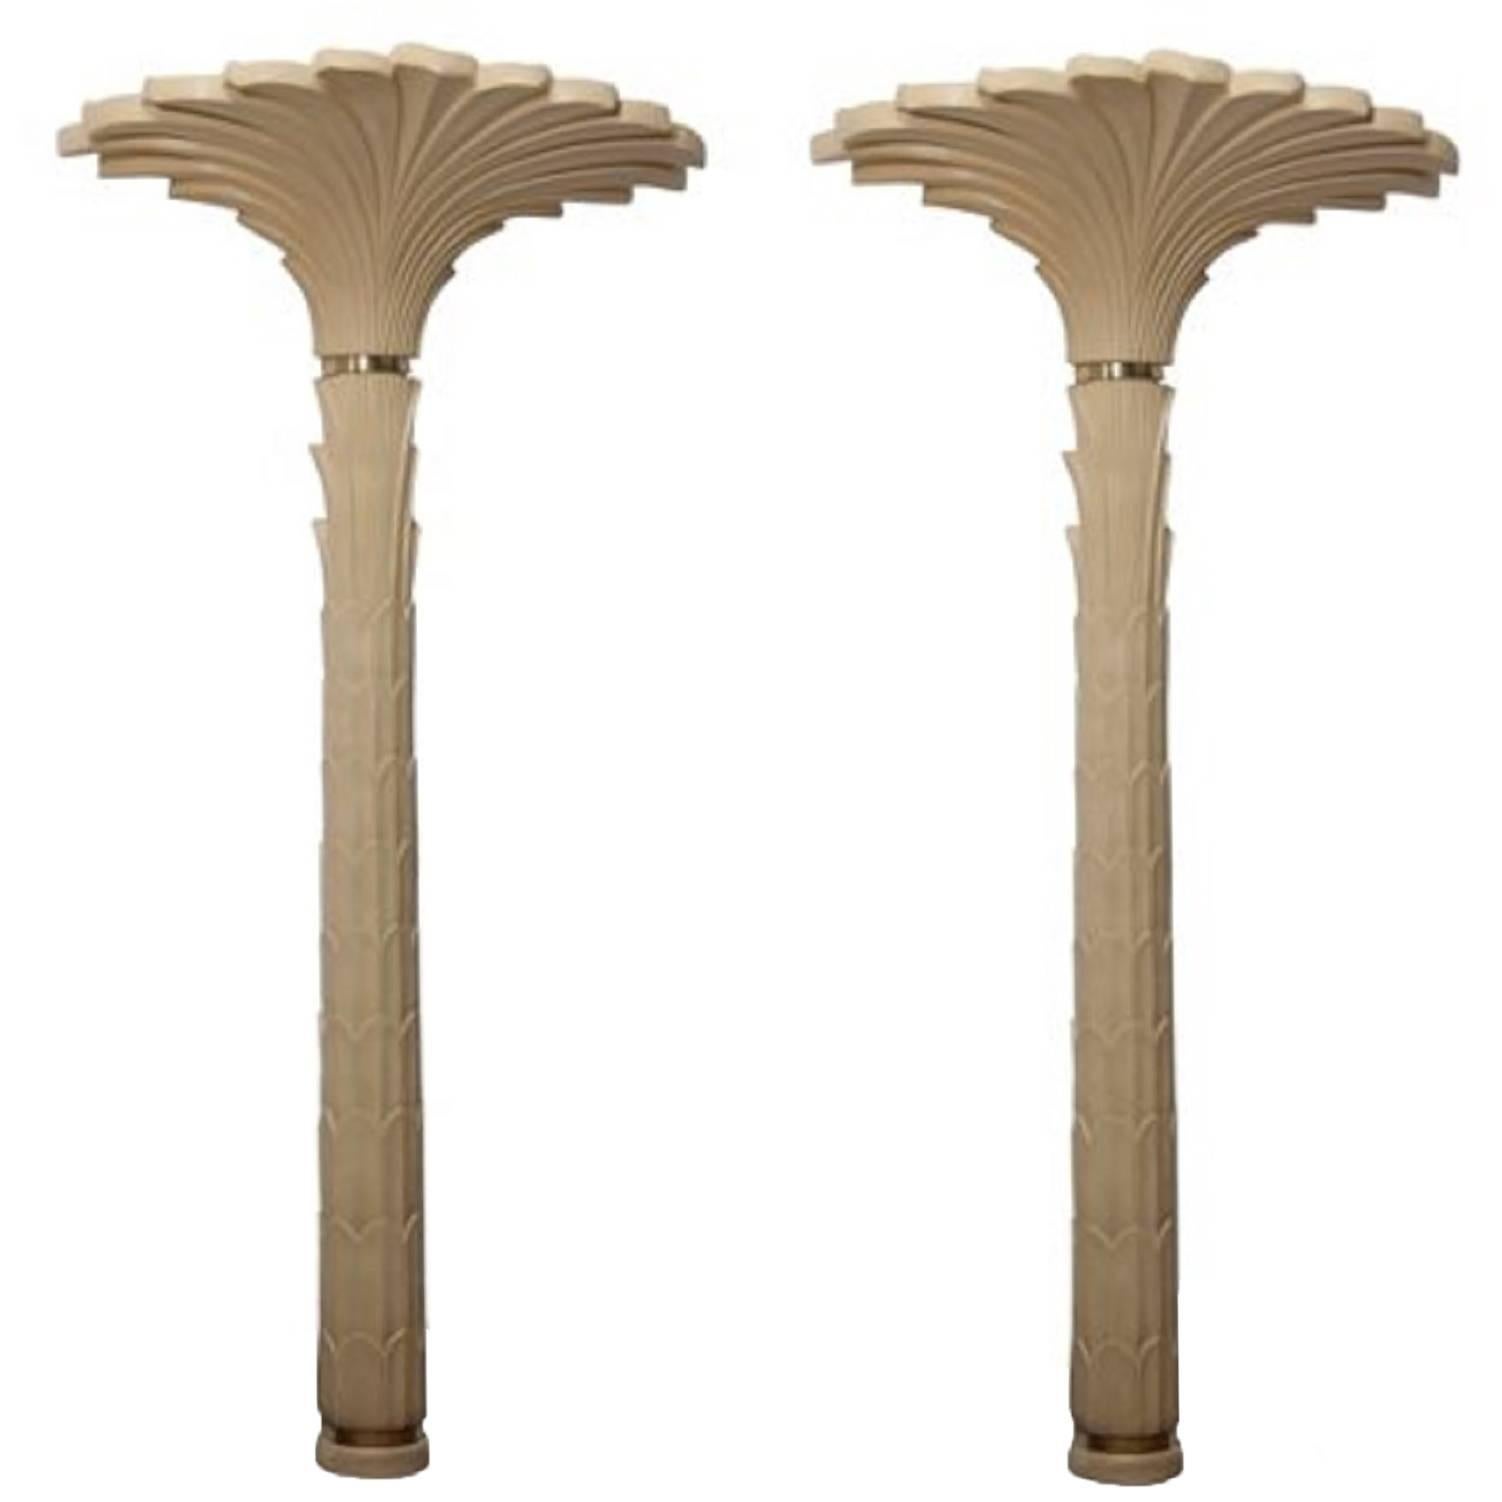 Pair of Torchiere Roche Style Palm Tree Floor and Wall Lamps by Merle Edelman